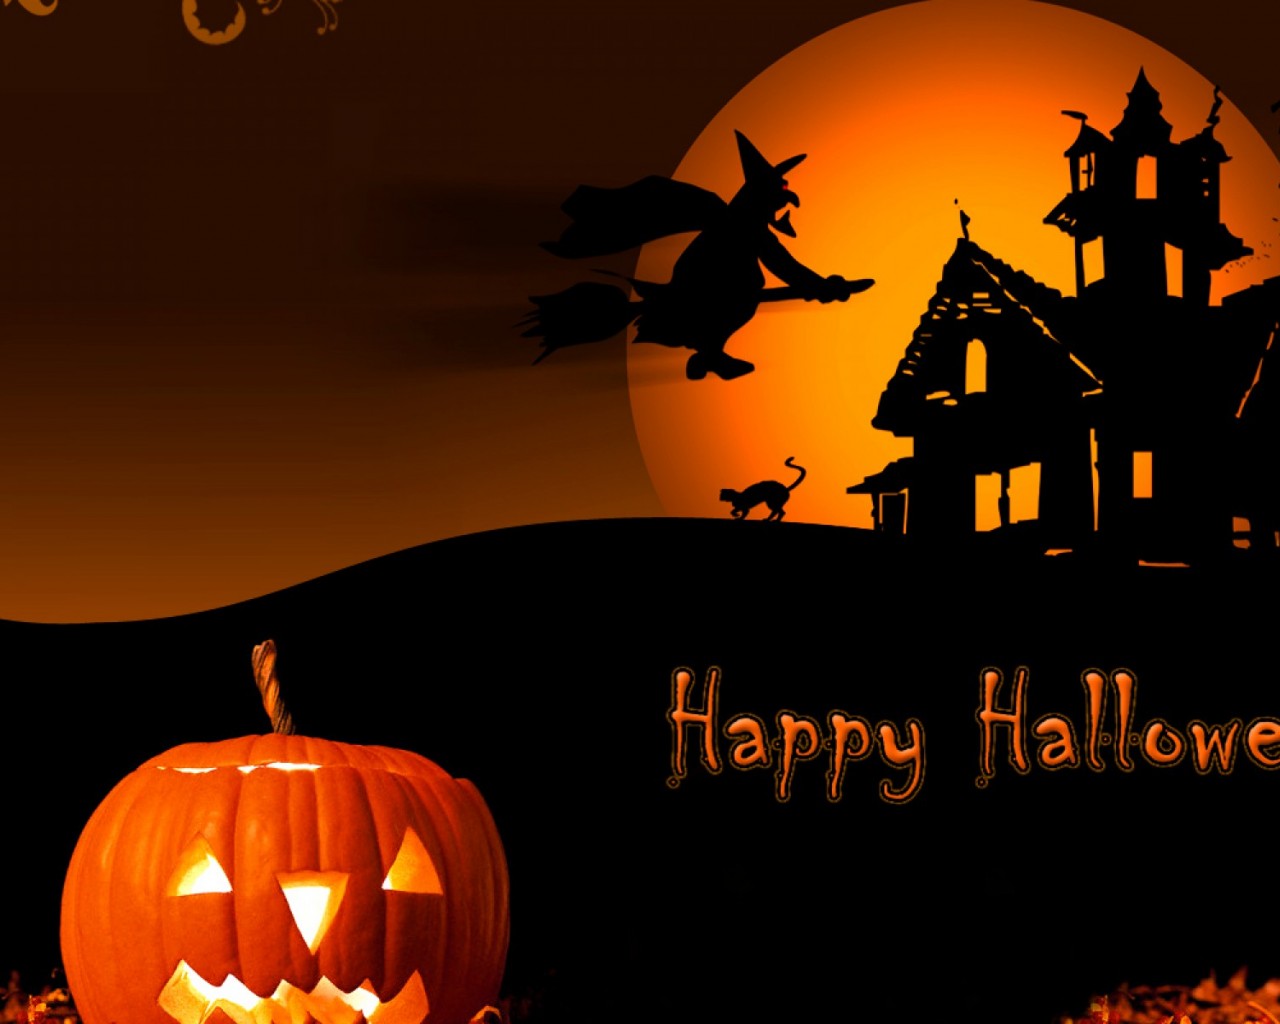 Windows8wallpaperHD Halloween Witches House Html